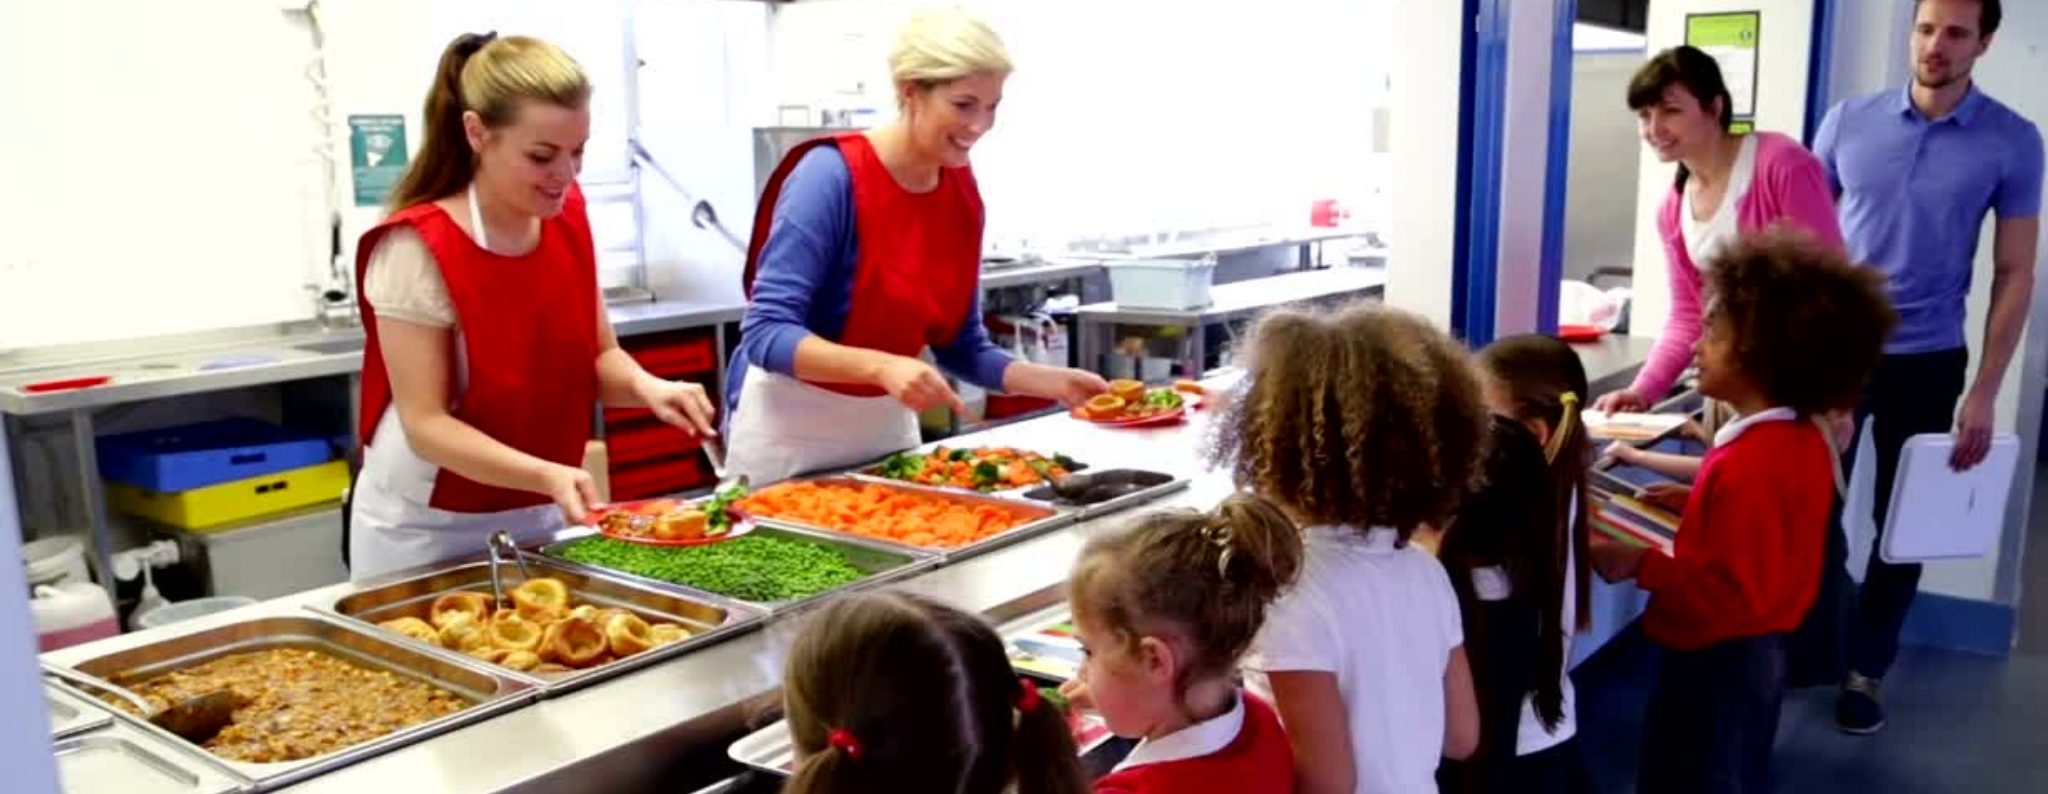 The Need For Free or Reduced School Lunches Increases After Pandemic